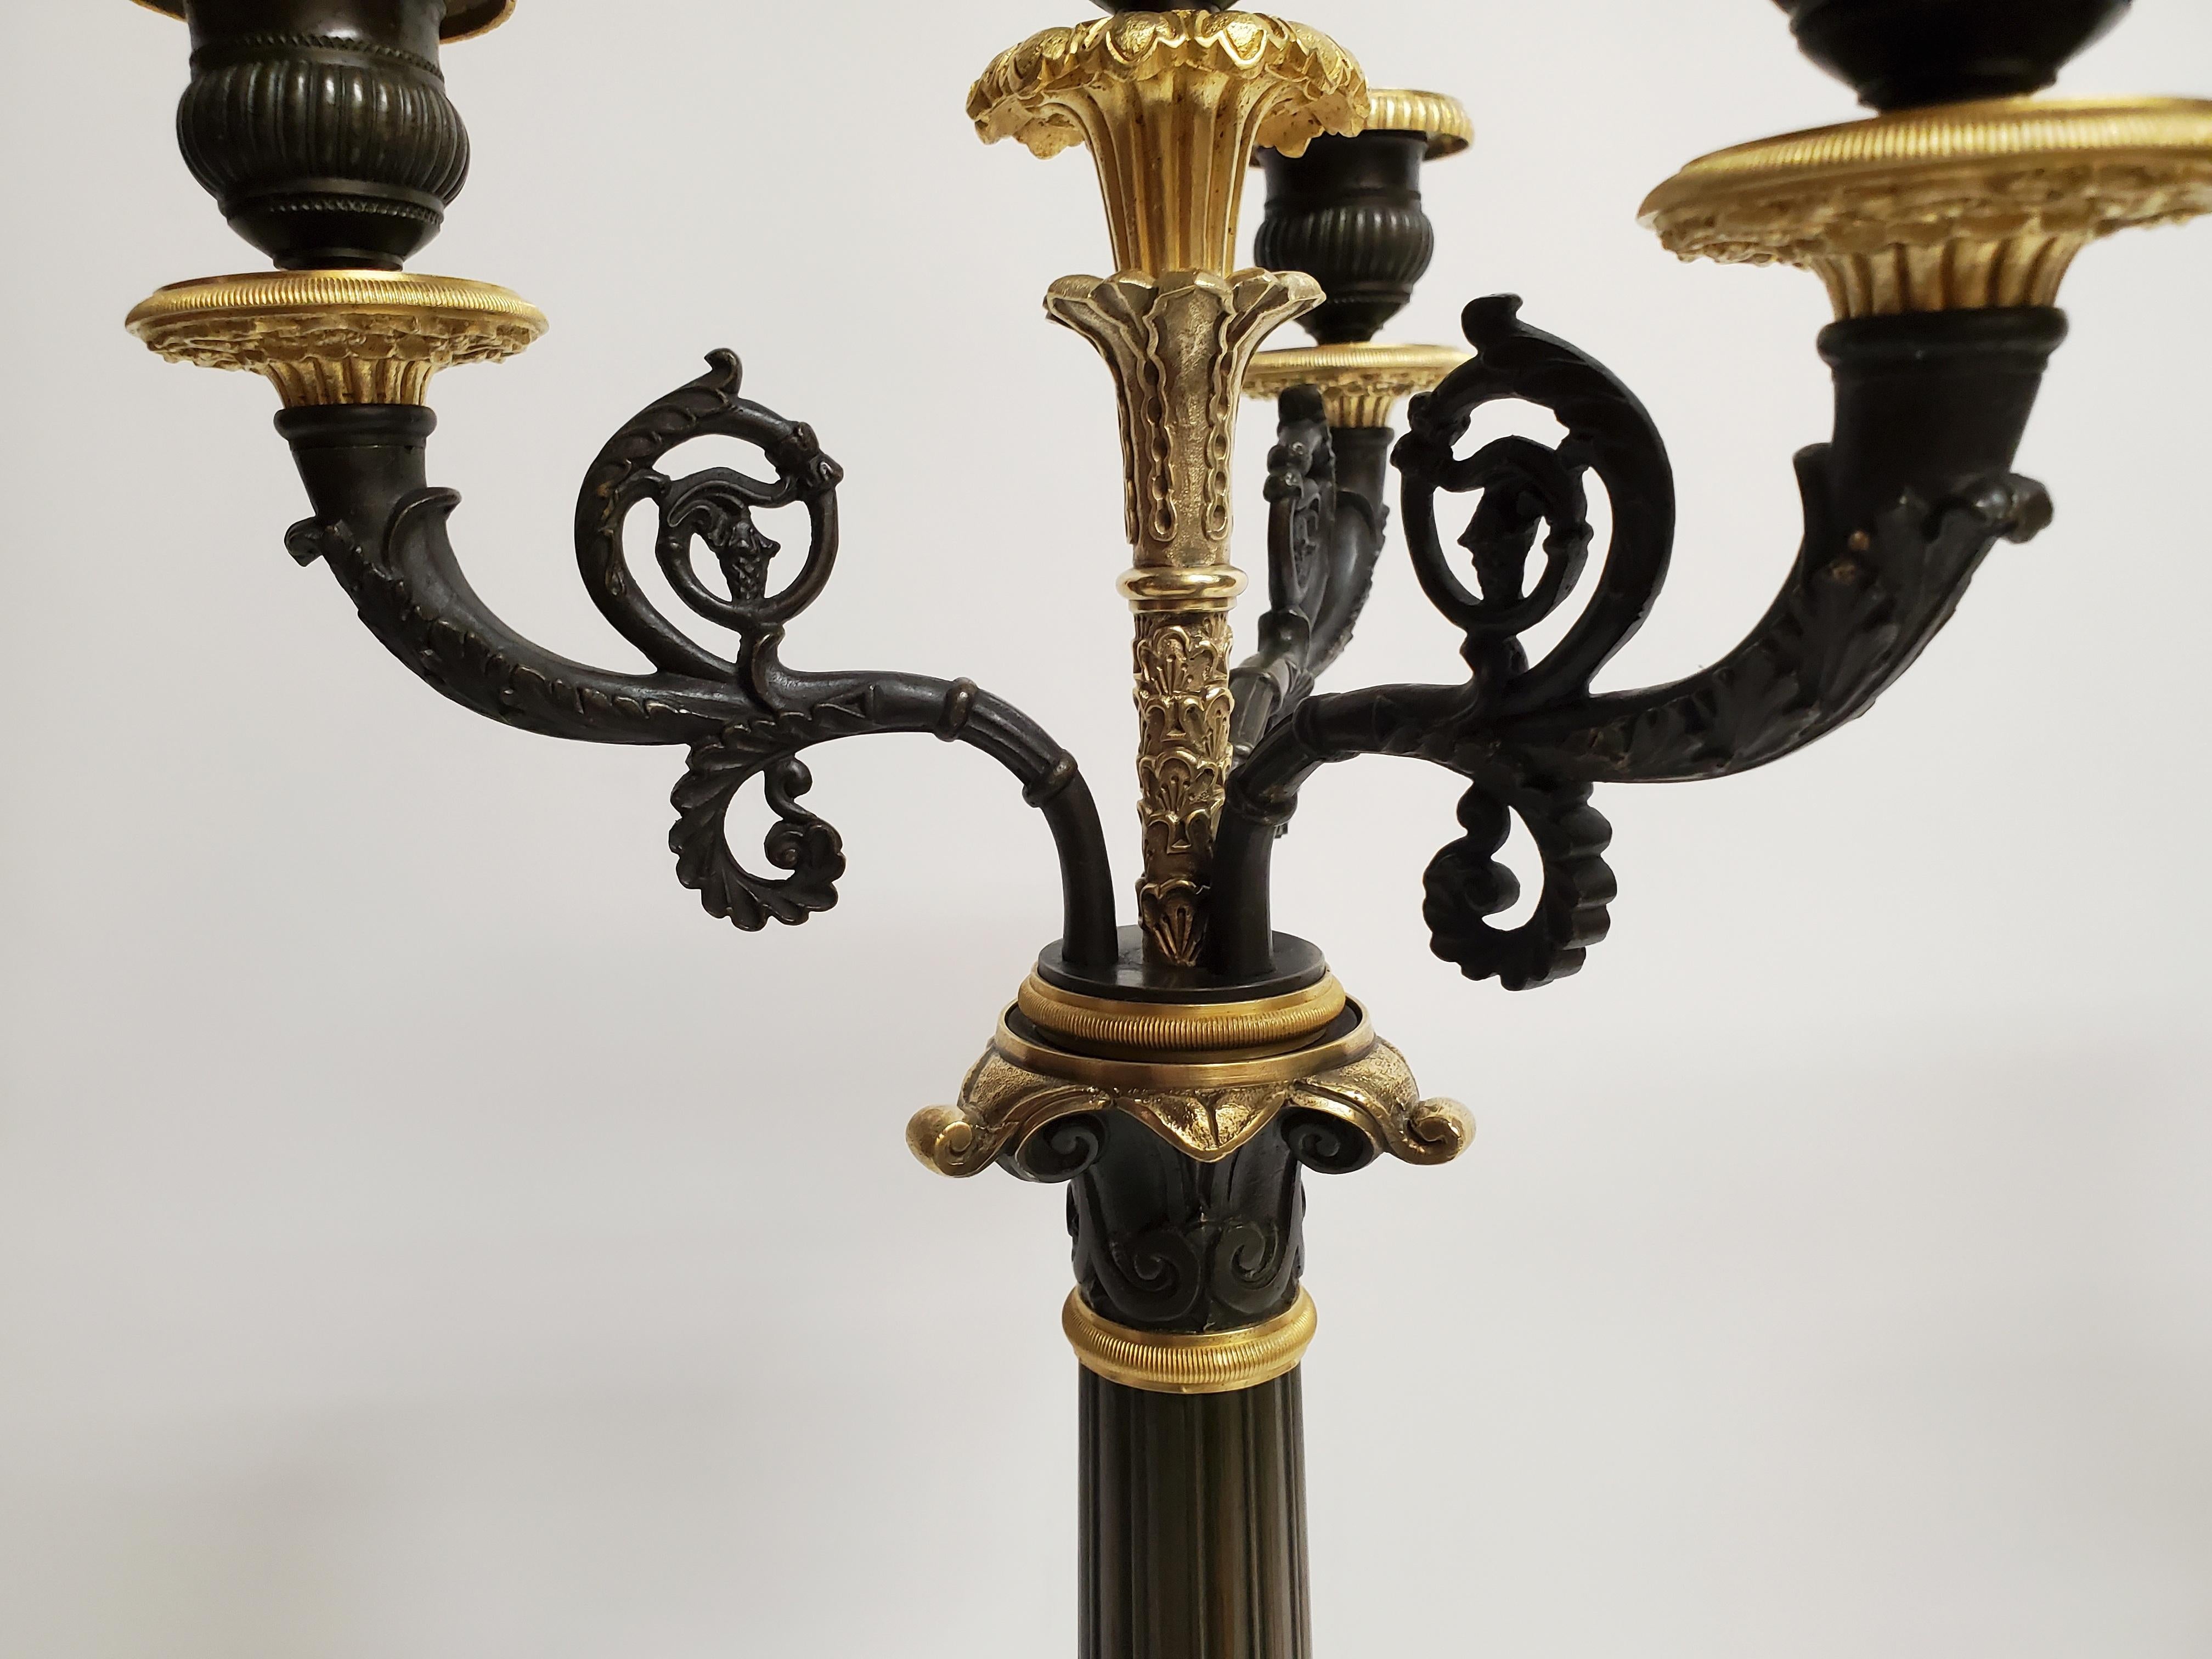 Antique French Bronze and Ormolu Restauration Period Candelabra, circa 1830-1840 In Good Condition For Sale In New Orleans, LA